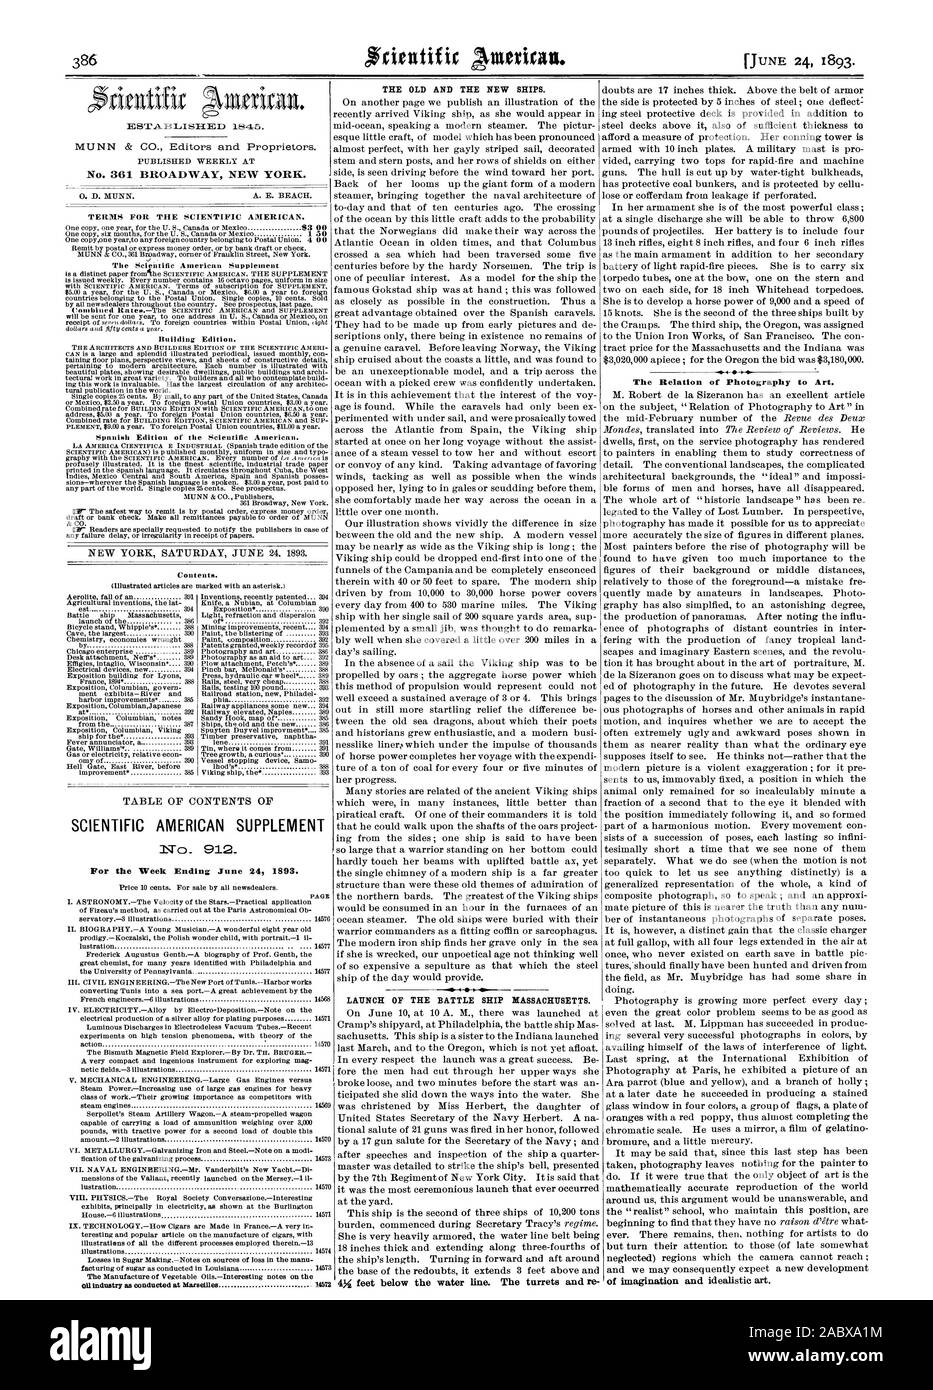 SCIENTIFIC AMERICAN SUPPLEMENT No  912 For the Week Ending June 24 1893. THE OLD AND THE NEW SHIPS. LAUNCH OF THE BATTLE SHIP MASSACHUSETTS. The Relation of Photography to Art., 1893-06-24 Stock Photo